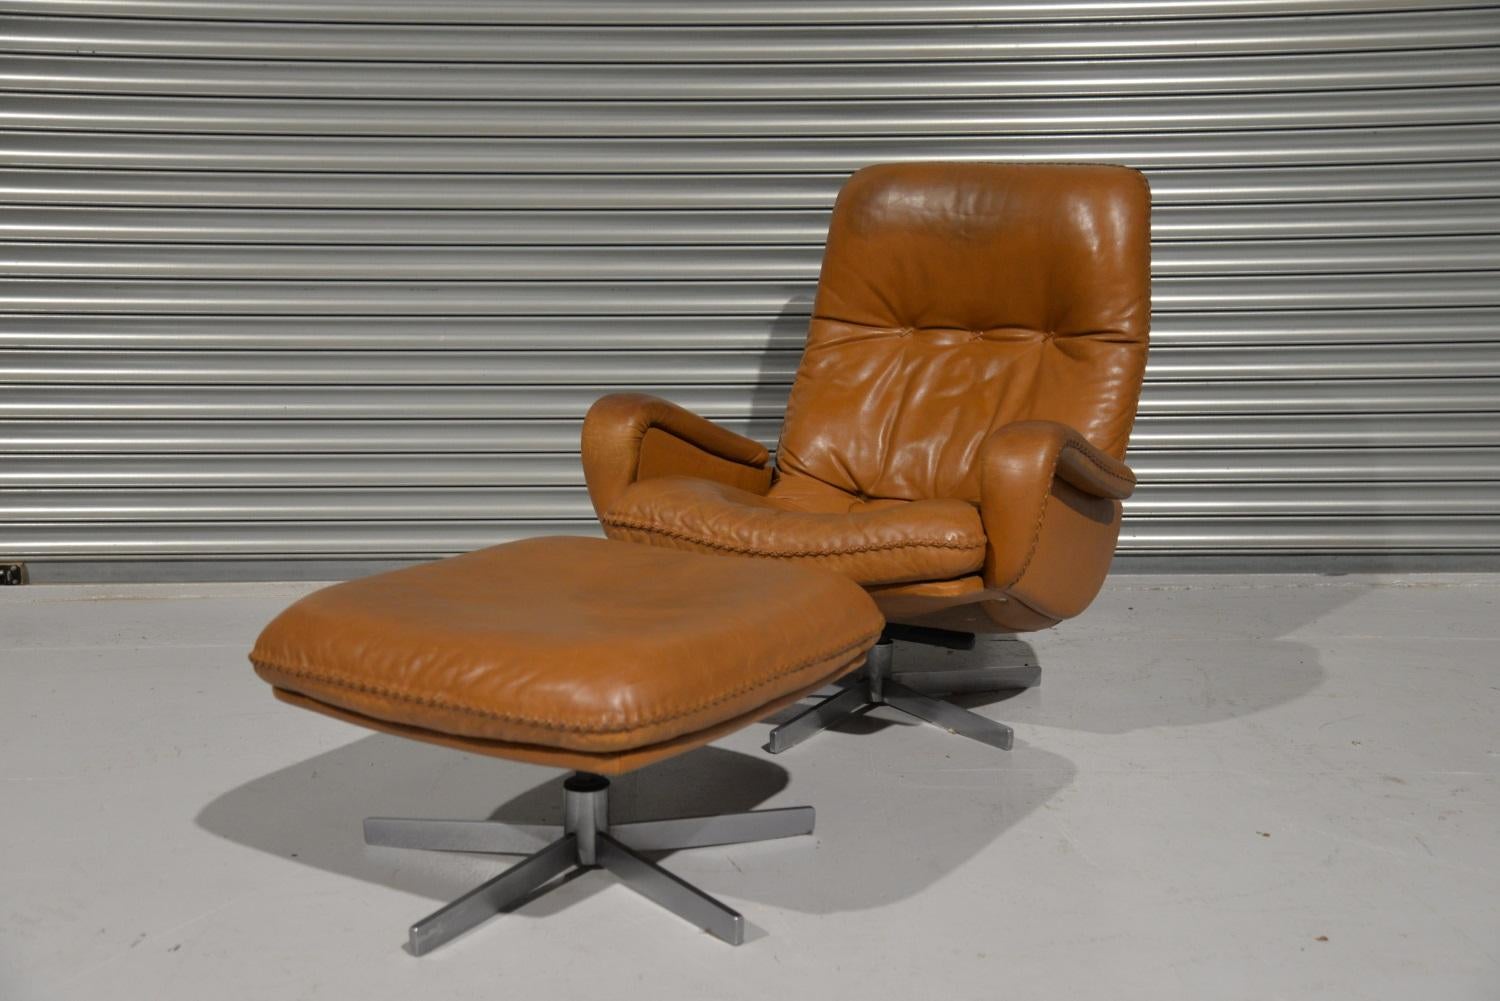 We are delighted to bring to you an ultra-rare and highly desirable De Sede S 231 vintage lounge swivel armchair and ottoman. Built in the late 1960s by De Sede craftsman from Switzerland this same chair was used as a prop in the 1969 James Bond